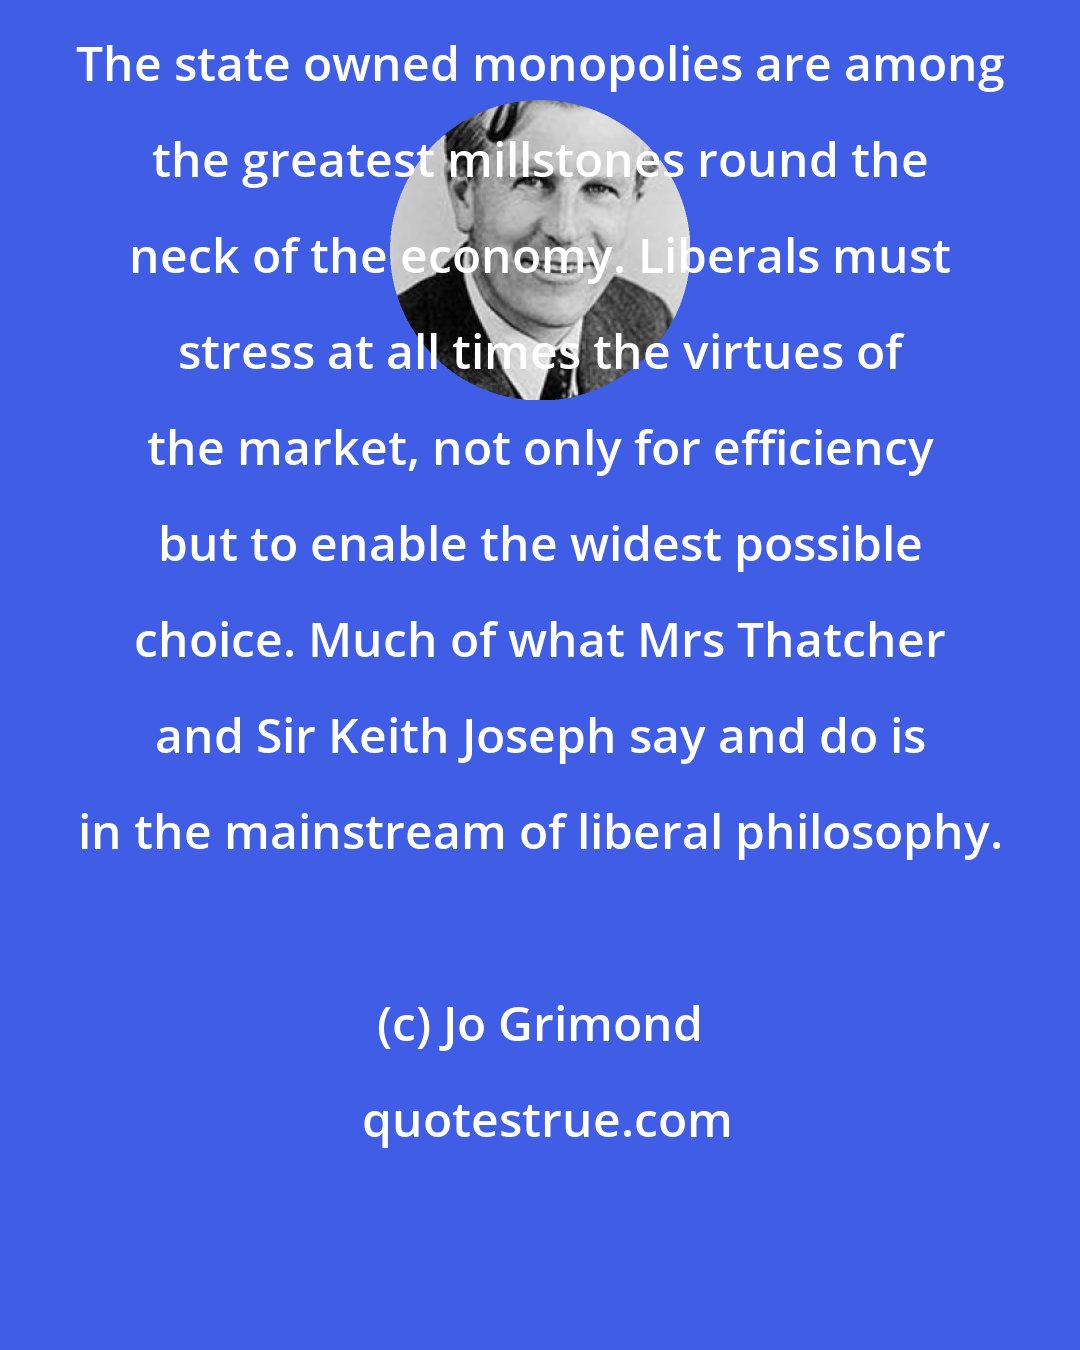 Jo Grimond: The state owned monopolies are among the greatest millstones round the neck of the economy. Liberals must stress at all times the virtues of the market, not only for efficiency but to enable the widest possible choice. Much of what Mrs Thatcher and Sir Keith Joseph say and do is in the mainstream of liberal philosophy.